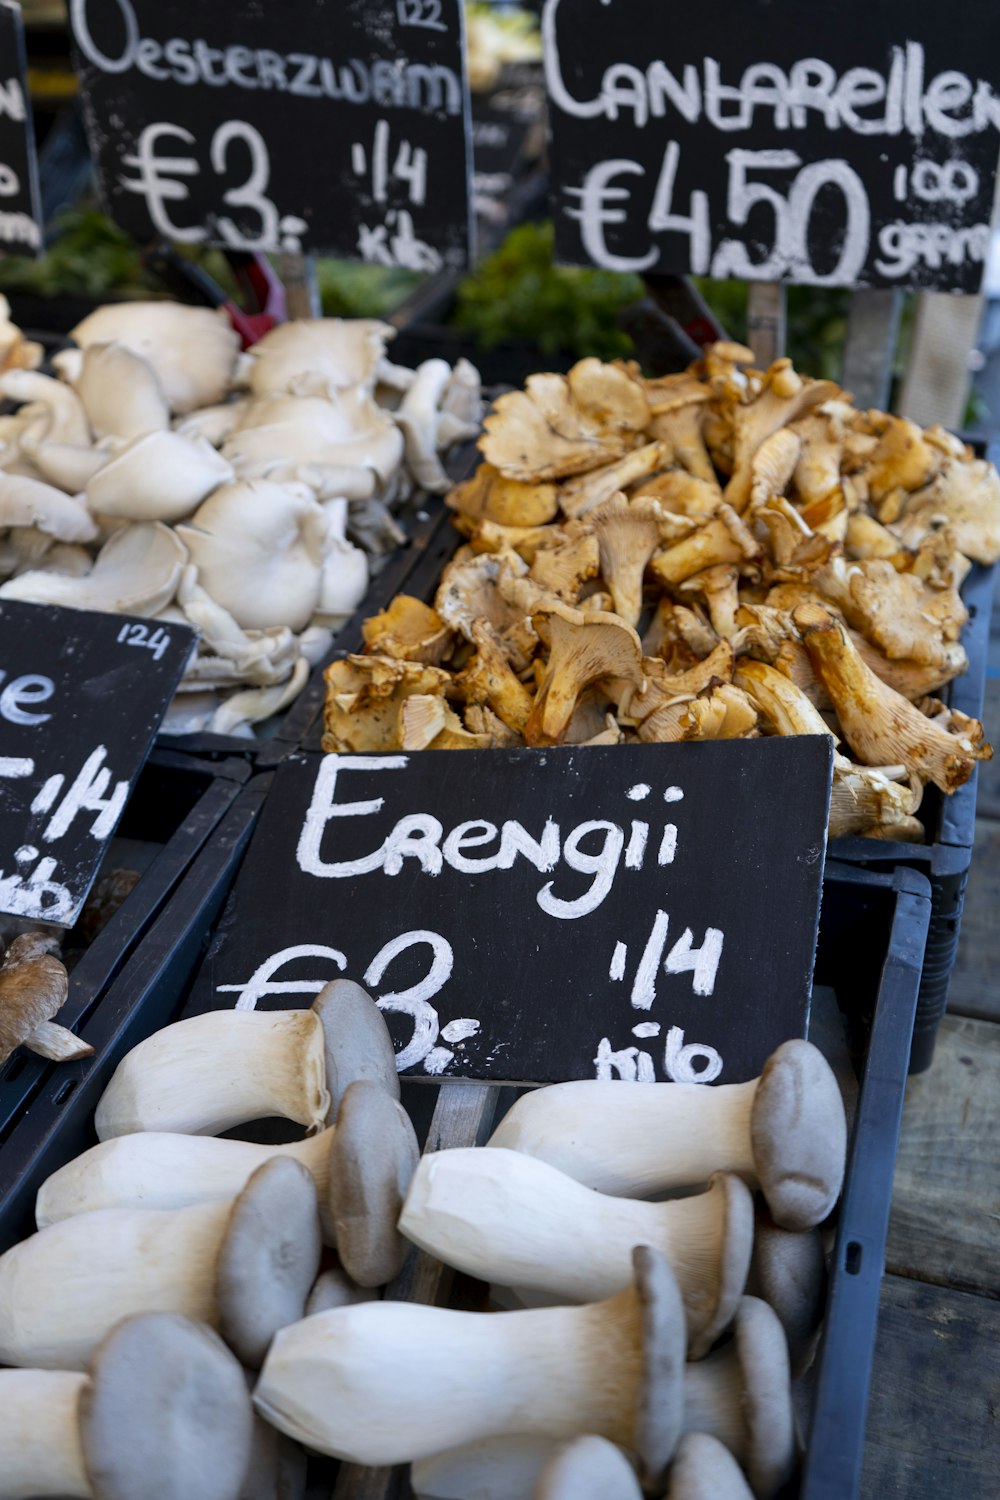 a bunch of different types of mushrooms for sale